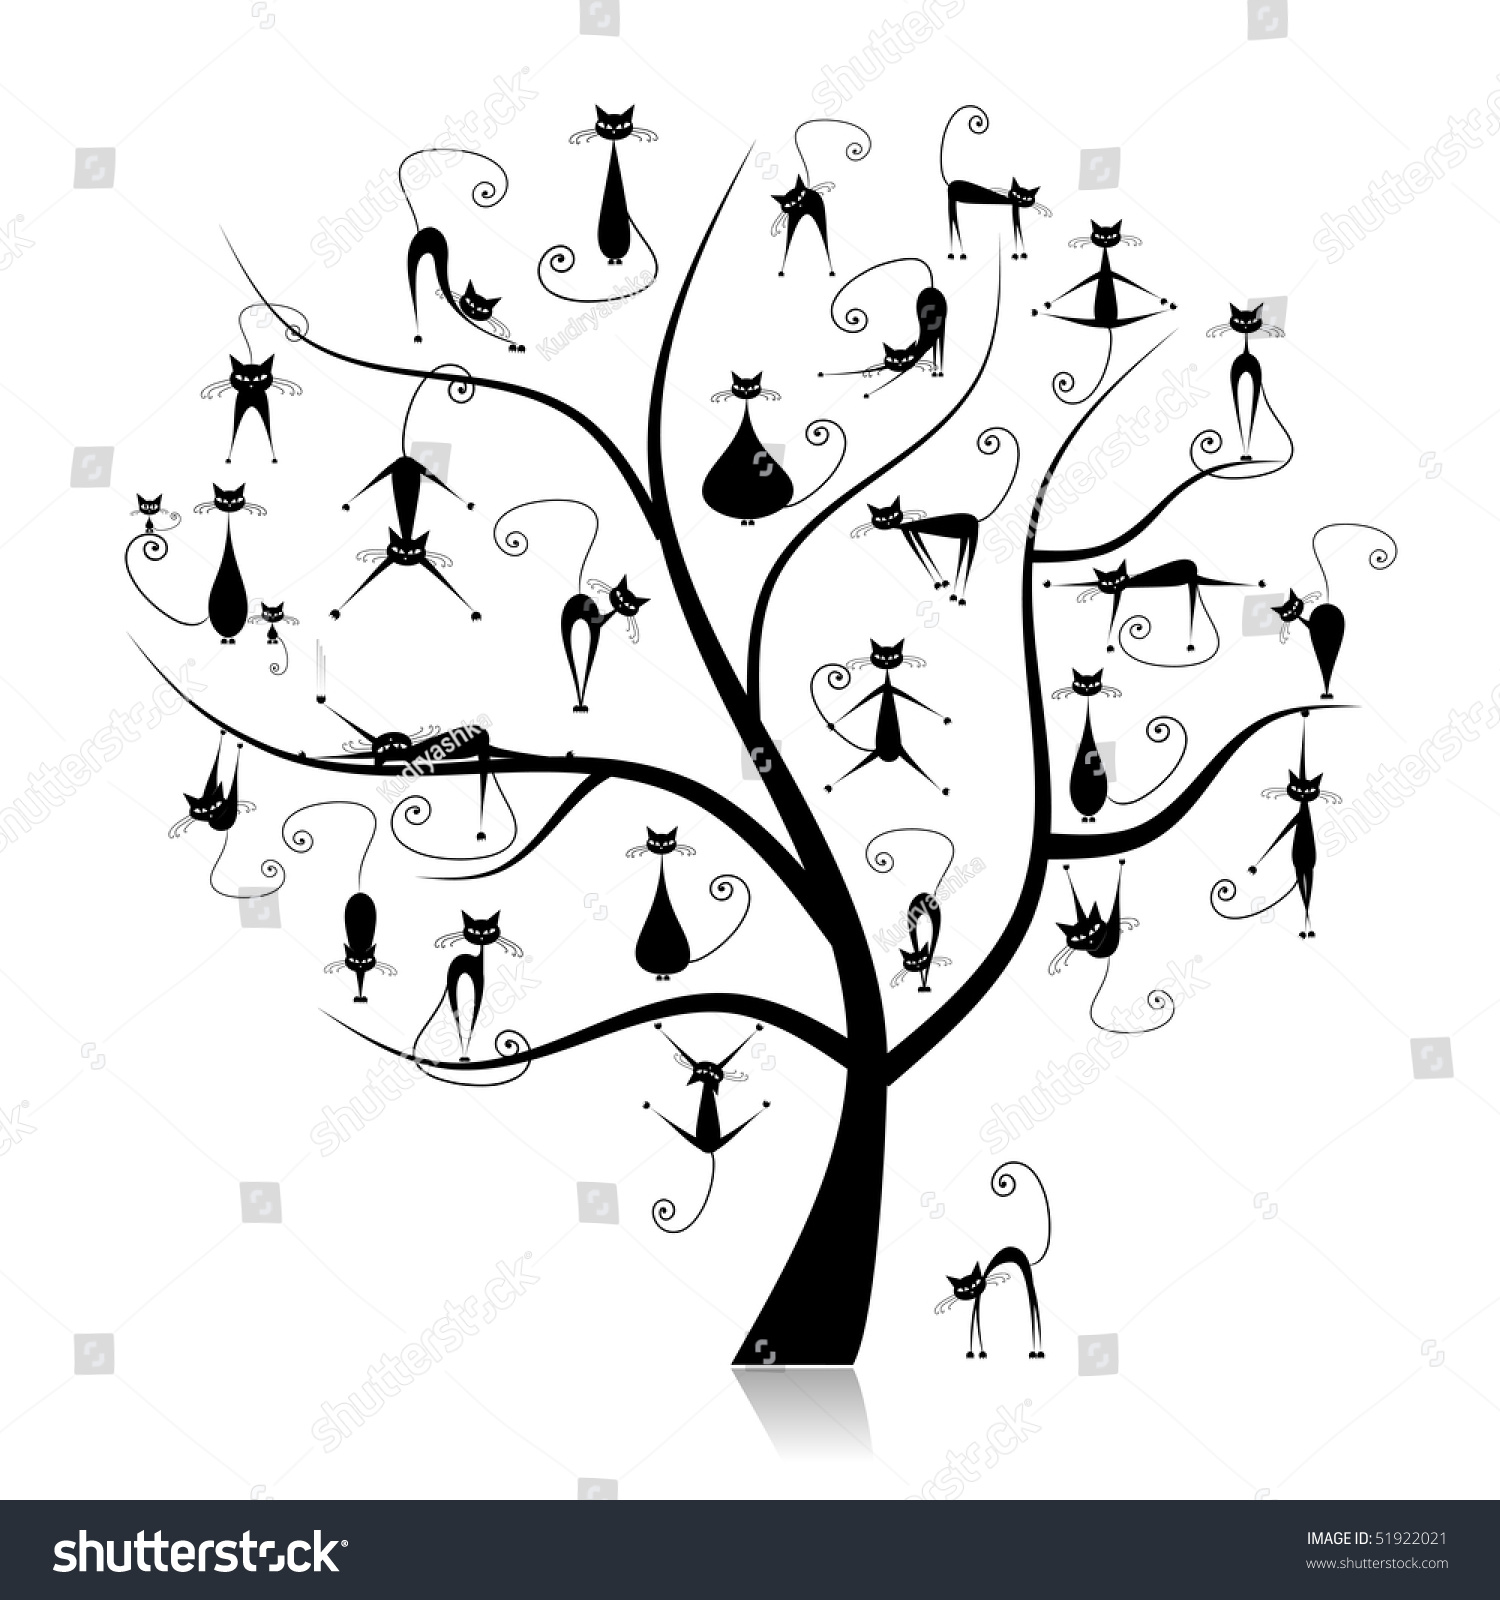 clipart cat in tree - photo #41